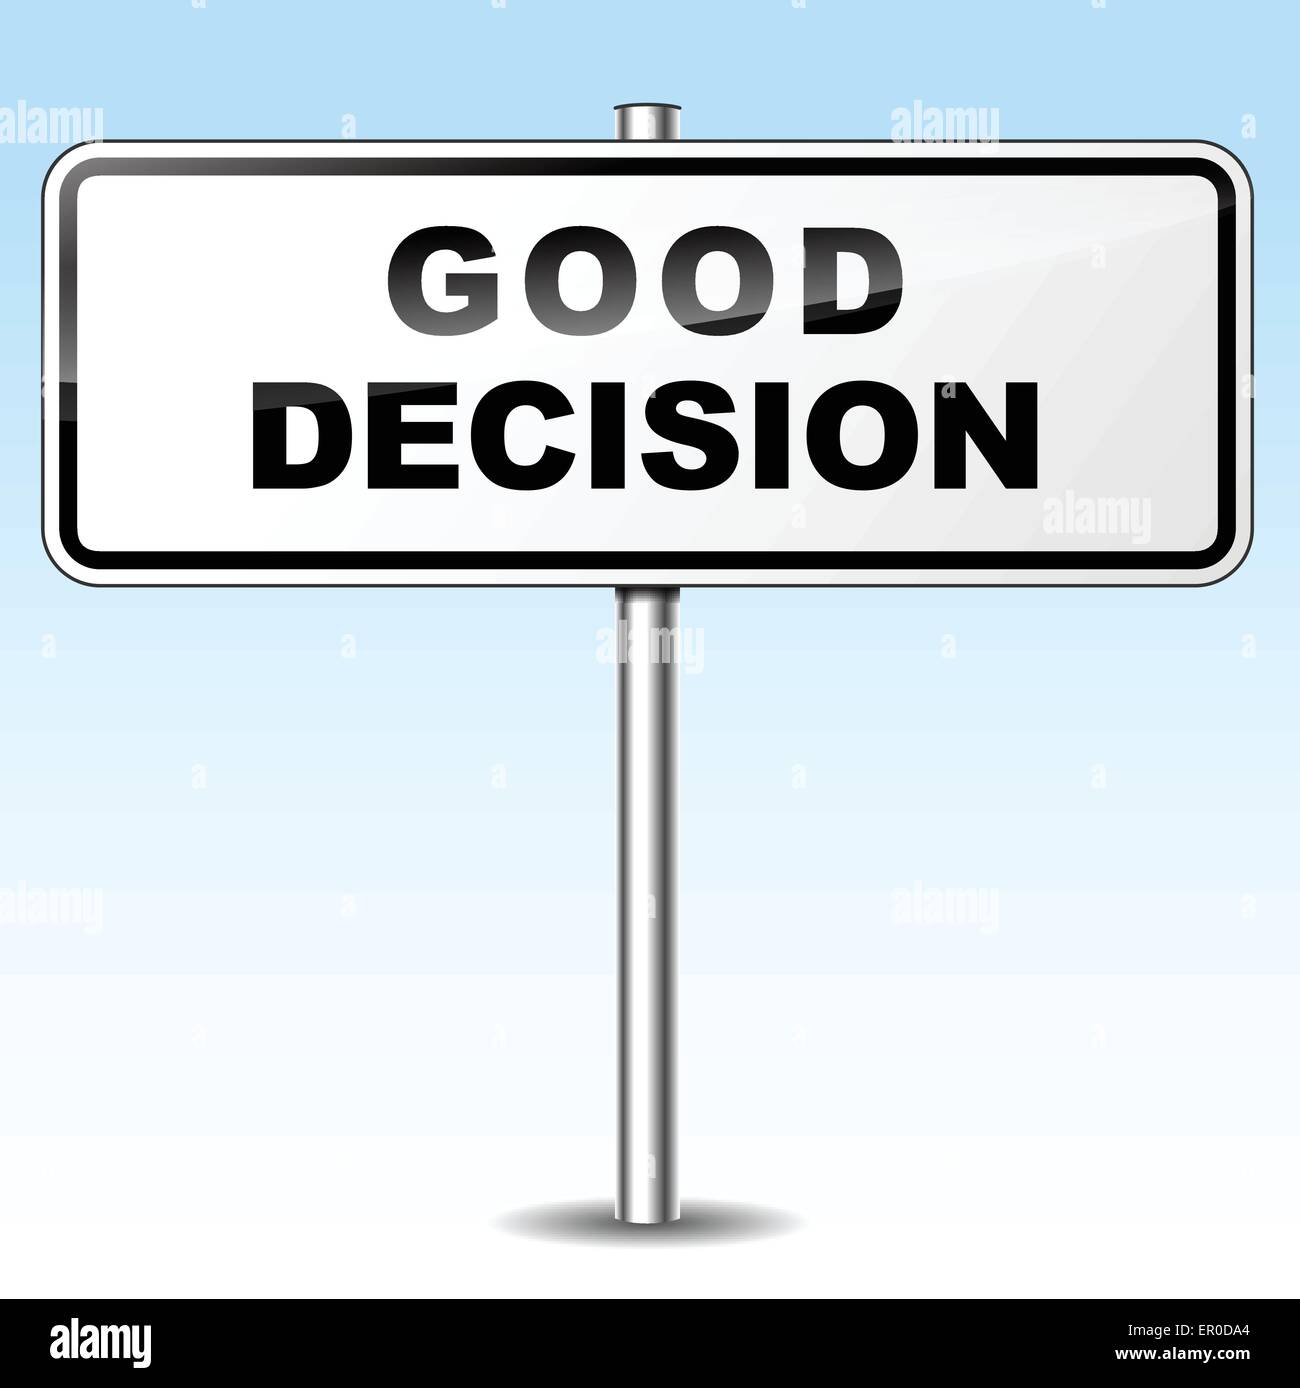 Illustration of good decision sign on sky background Stock Vector